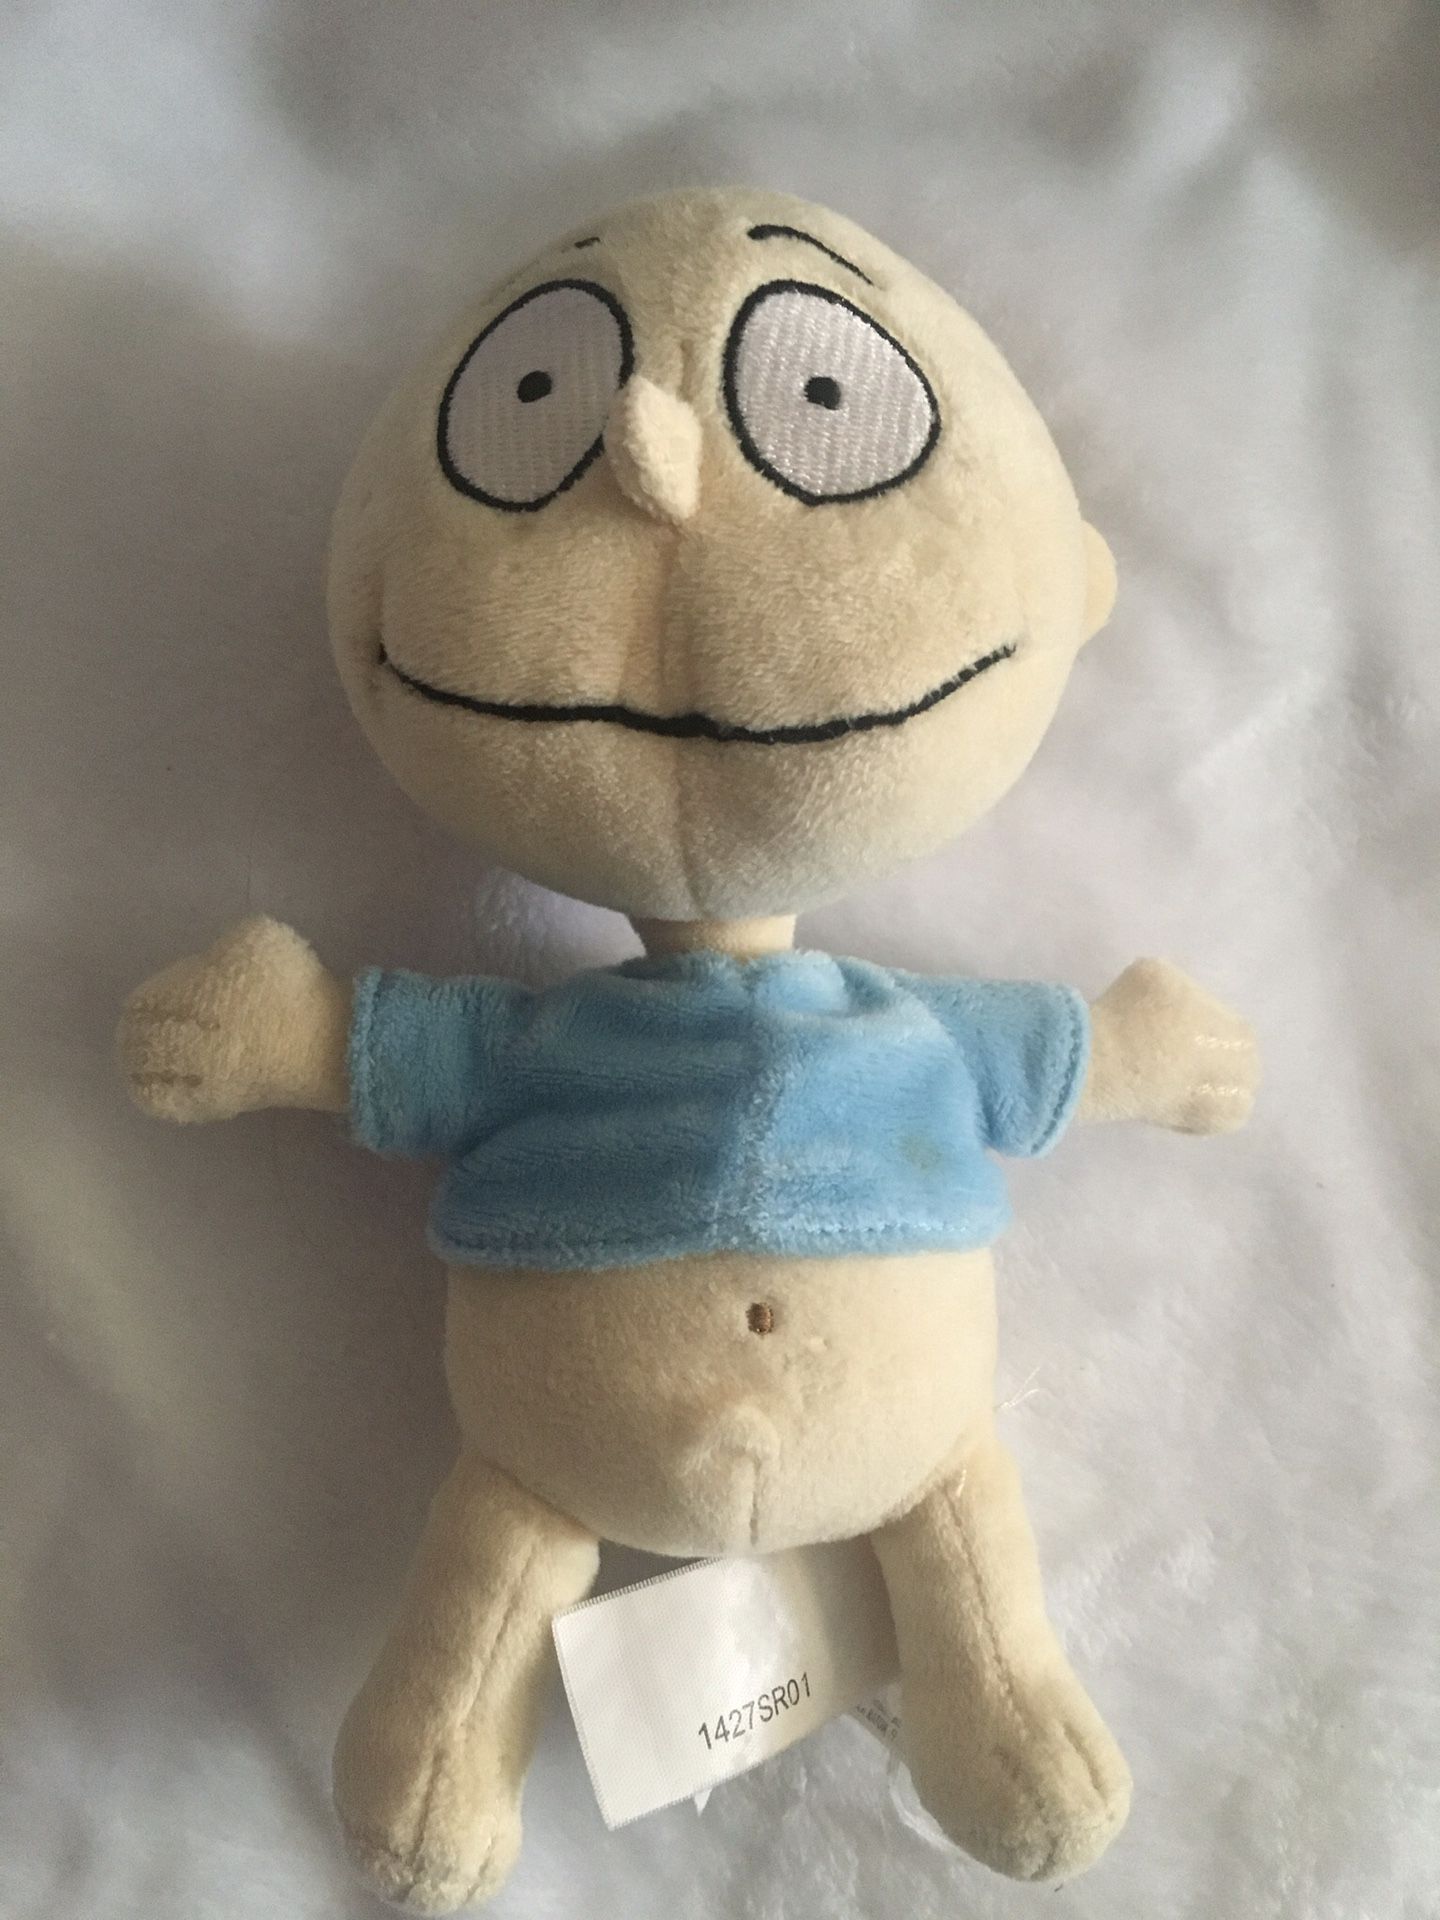 Nickelodeon Rugrats Tommy Pickles 8” Stuffed Animal